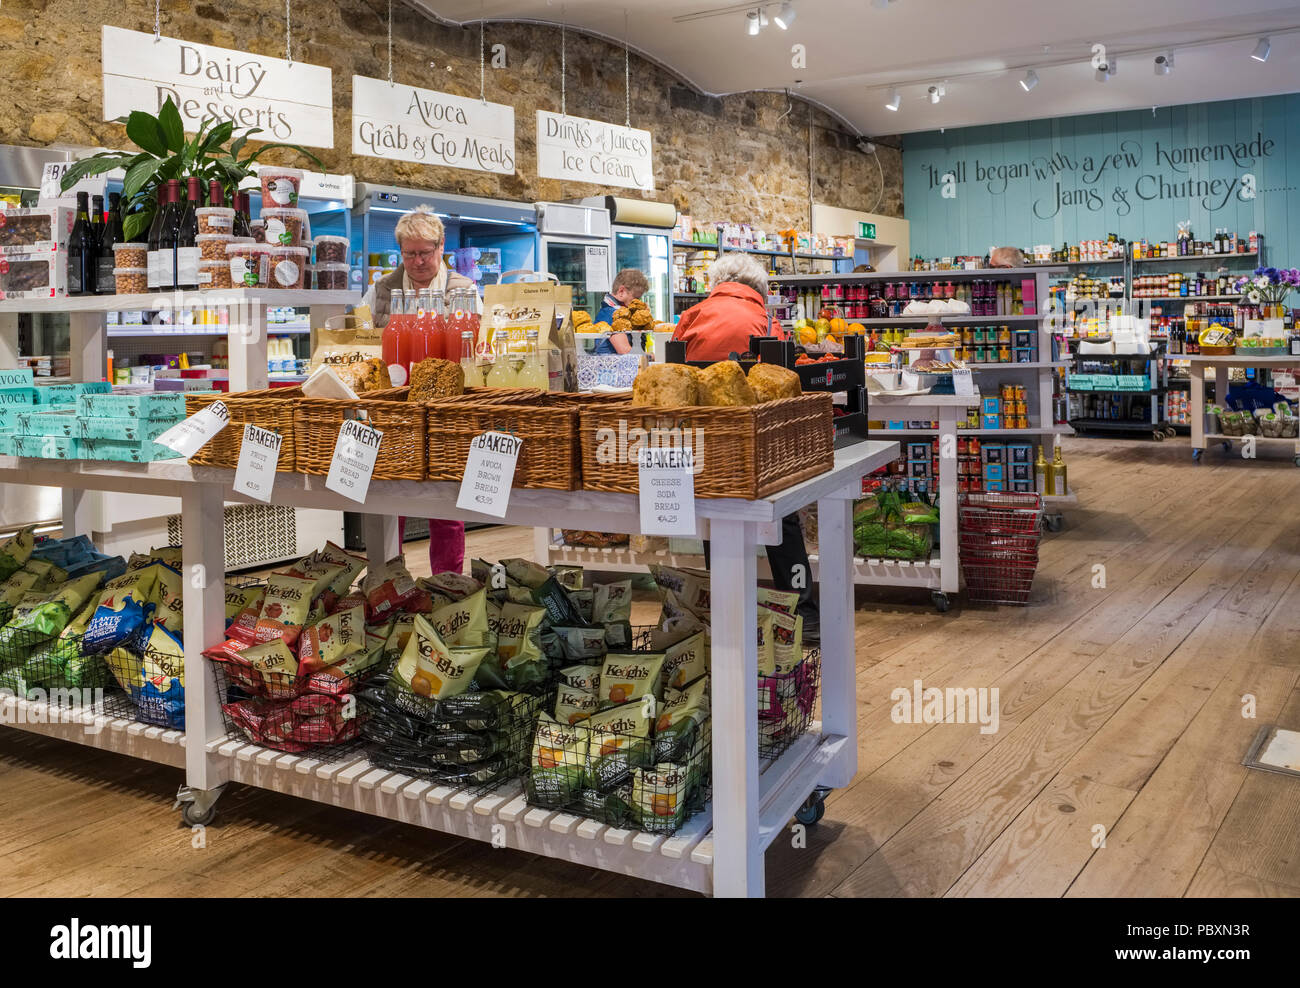 People shopping inside an Avoca store, an upmarket retail shop in the Republic of Ireland, Europe Stock Photo